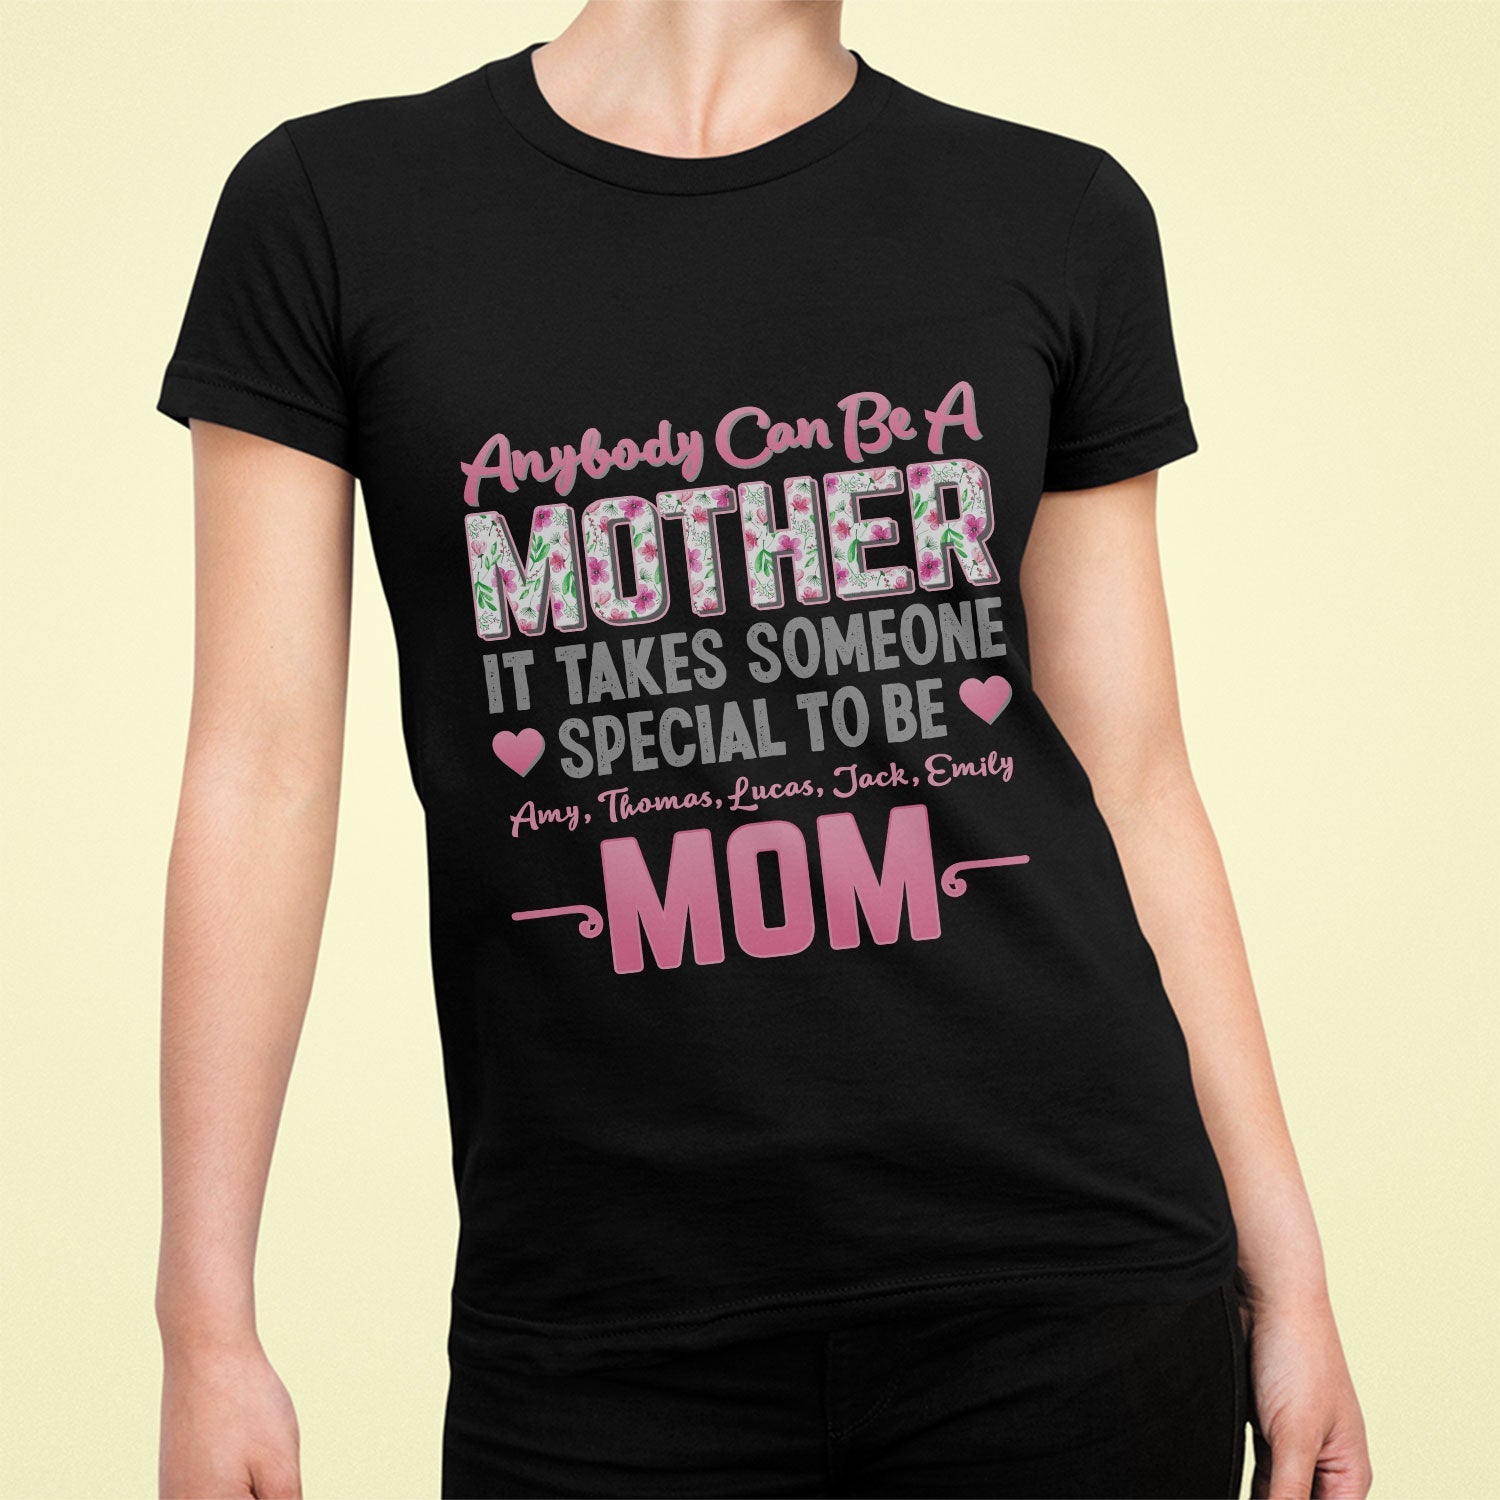 Anybody Can Be A Mother It Takes Someone Special To Be Mom Personalized Shirt